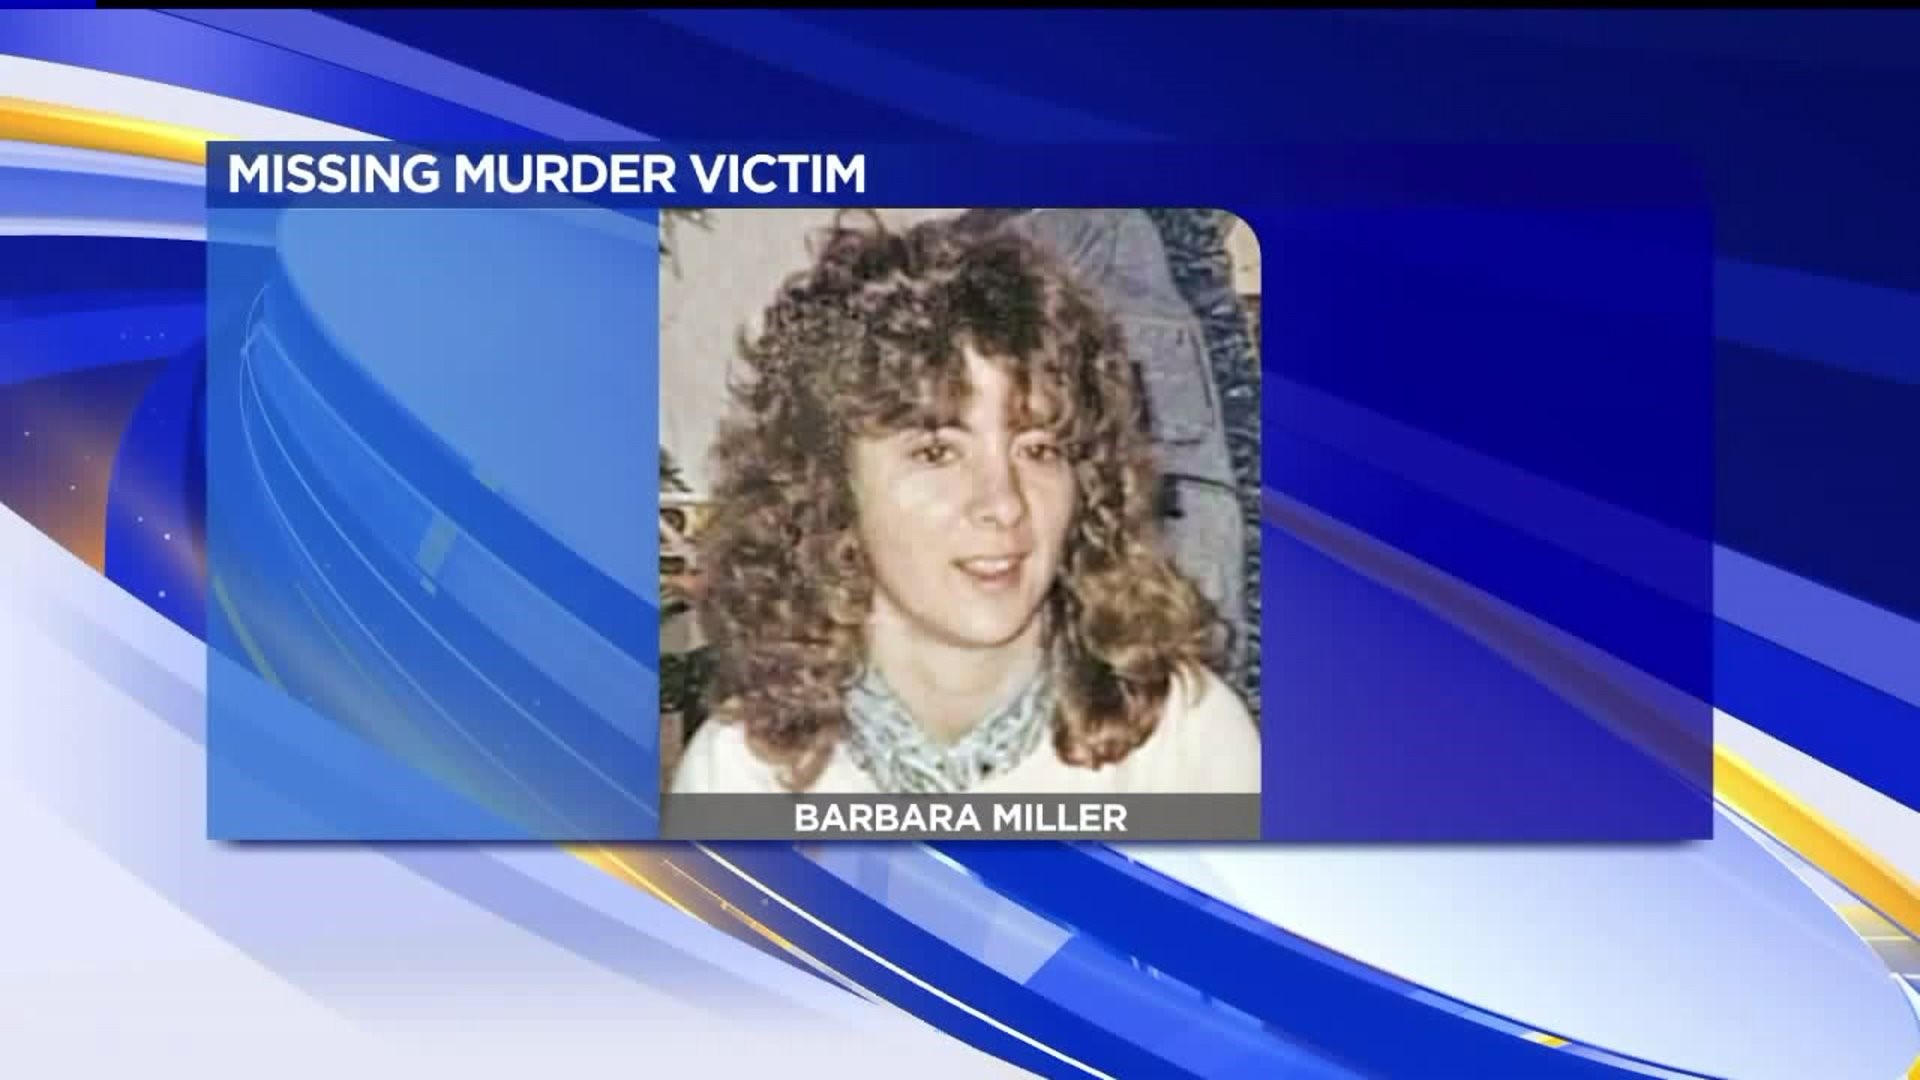 Sunbury Council Wants Funding for Barbara Miller Cold Case in 2019 Budget